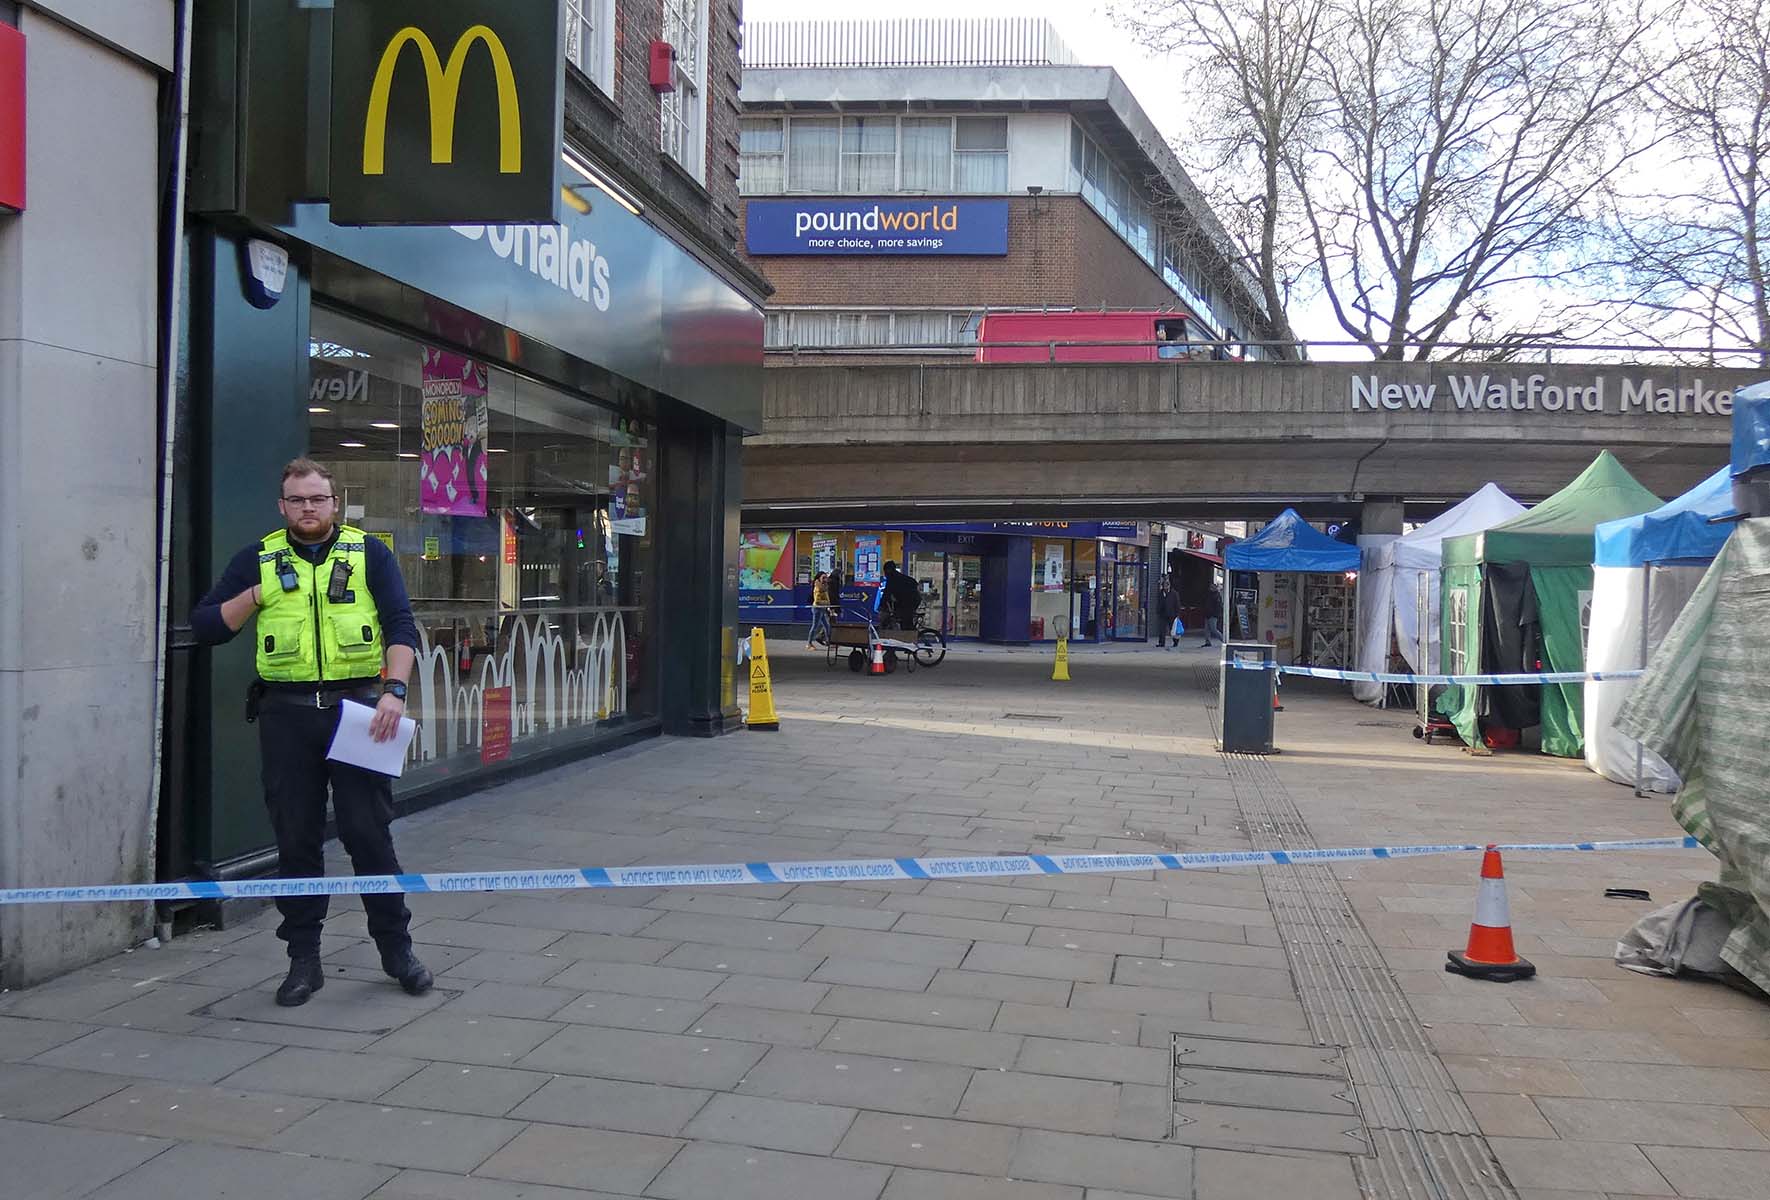 Daylight Stabbing in Town Centre Man Rushed to hospital